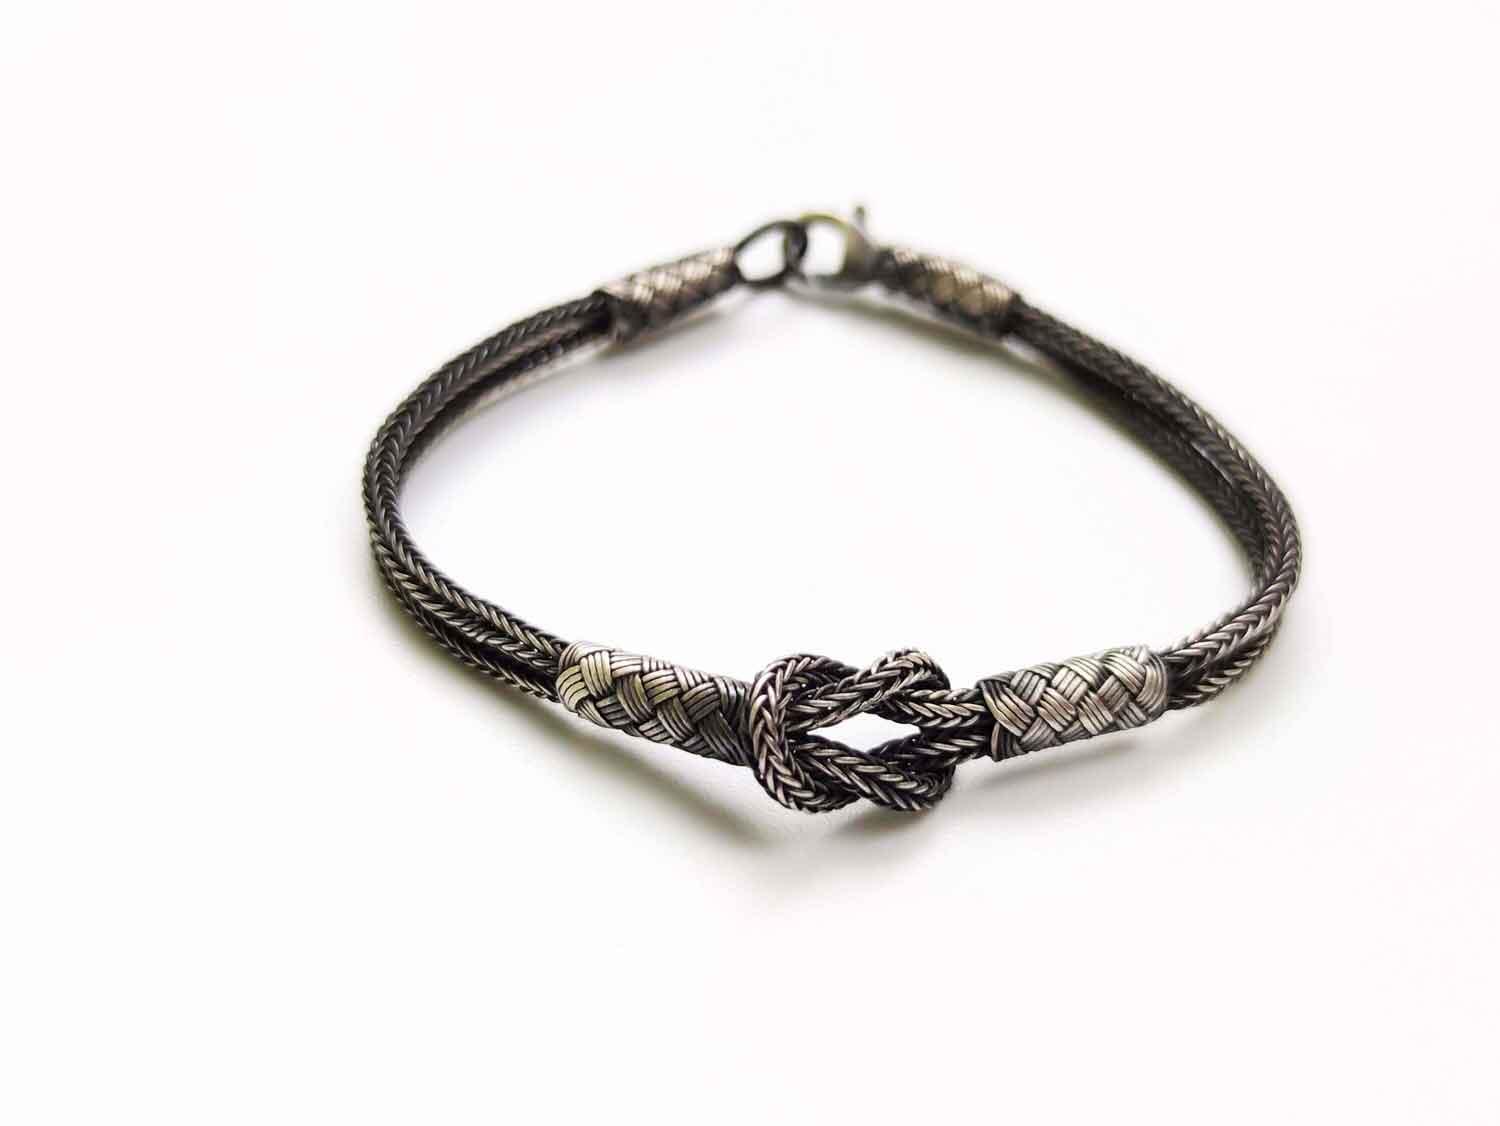 Handcrafted BRAIDED BRACELET, Sterling Silver, Weaved Handmade Bracelet, Silver Chain Bracelet, Layered Bracelet, Birthday Gift Bracelet, Boho Bracelet available at Moyoni Design